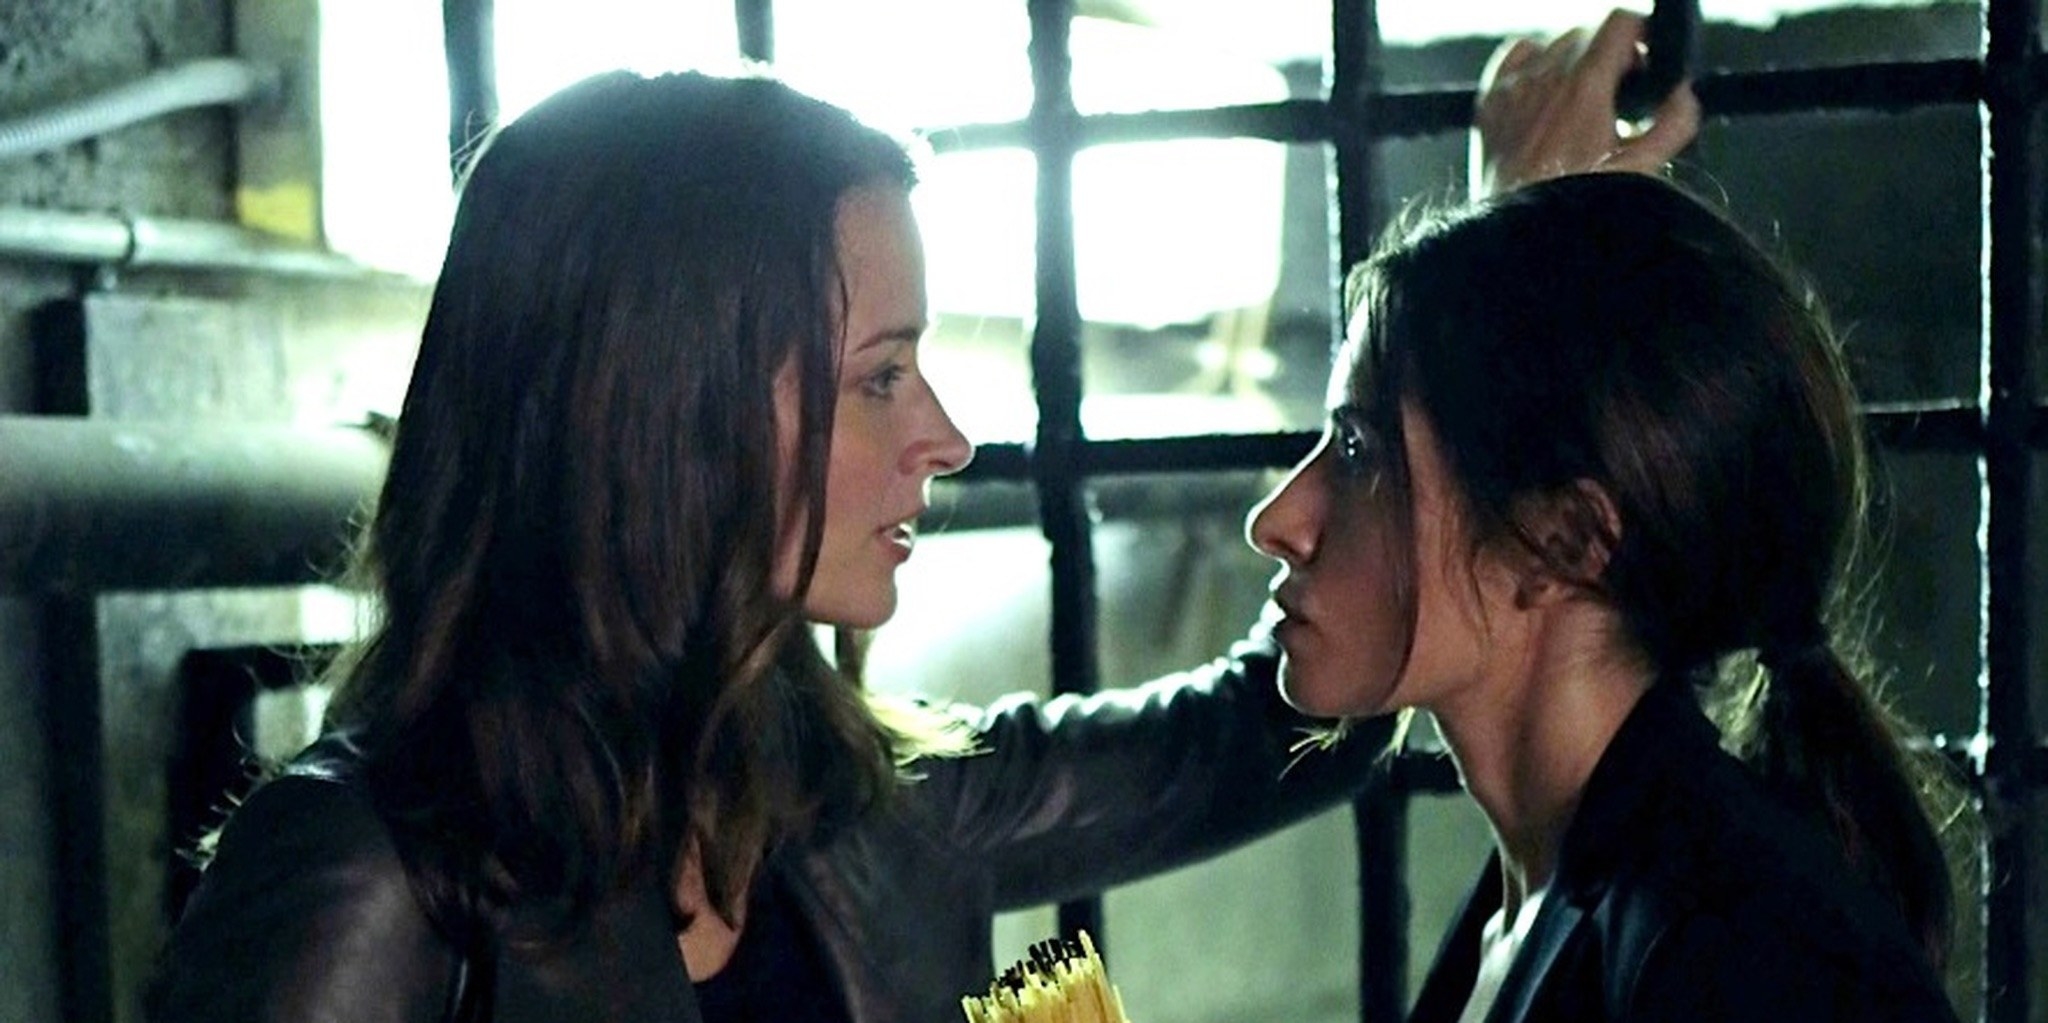 Root leans into Shaw&#x27;s personal space as usual